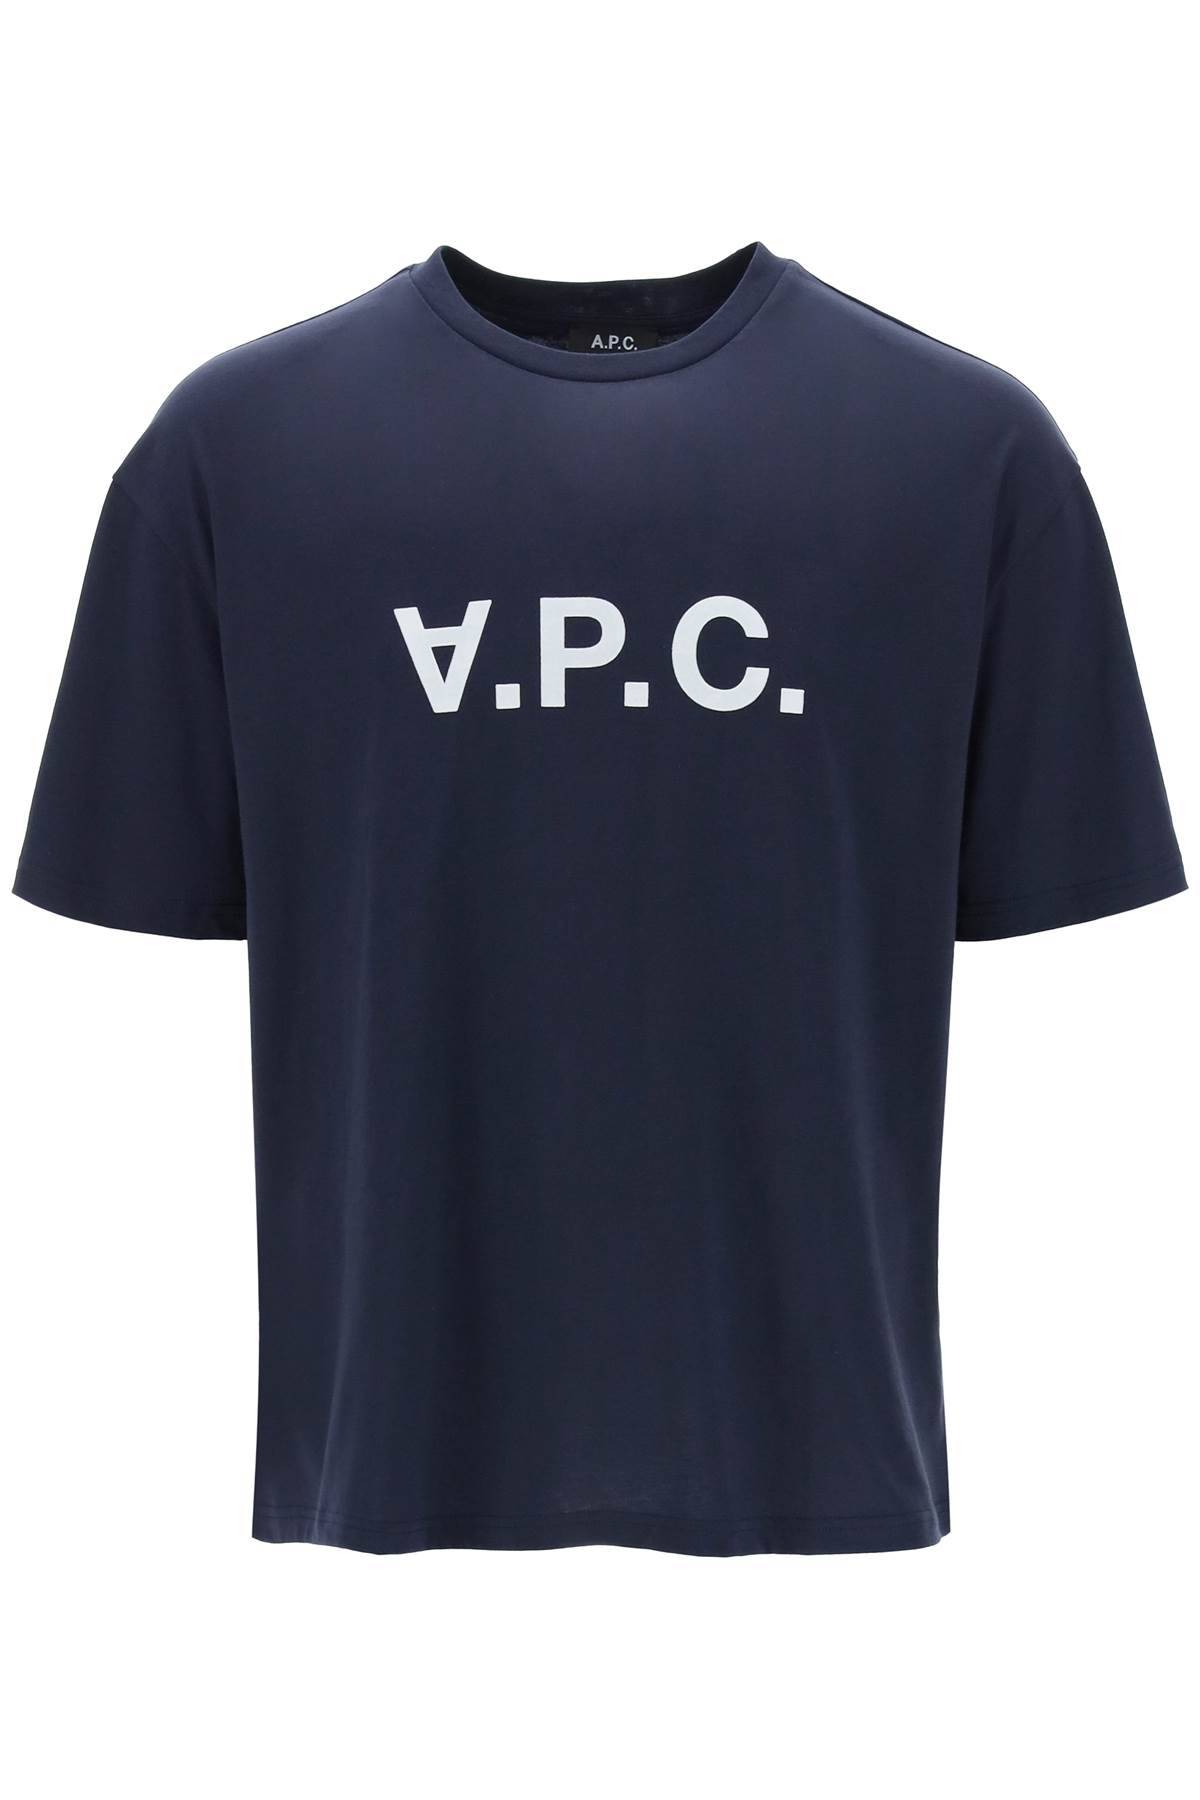 A.P.C. A. P.C. river t-shirt with flocked logo